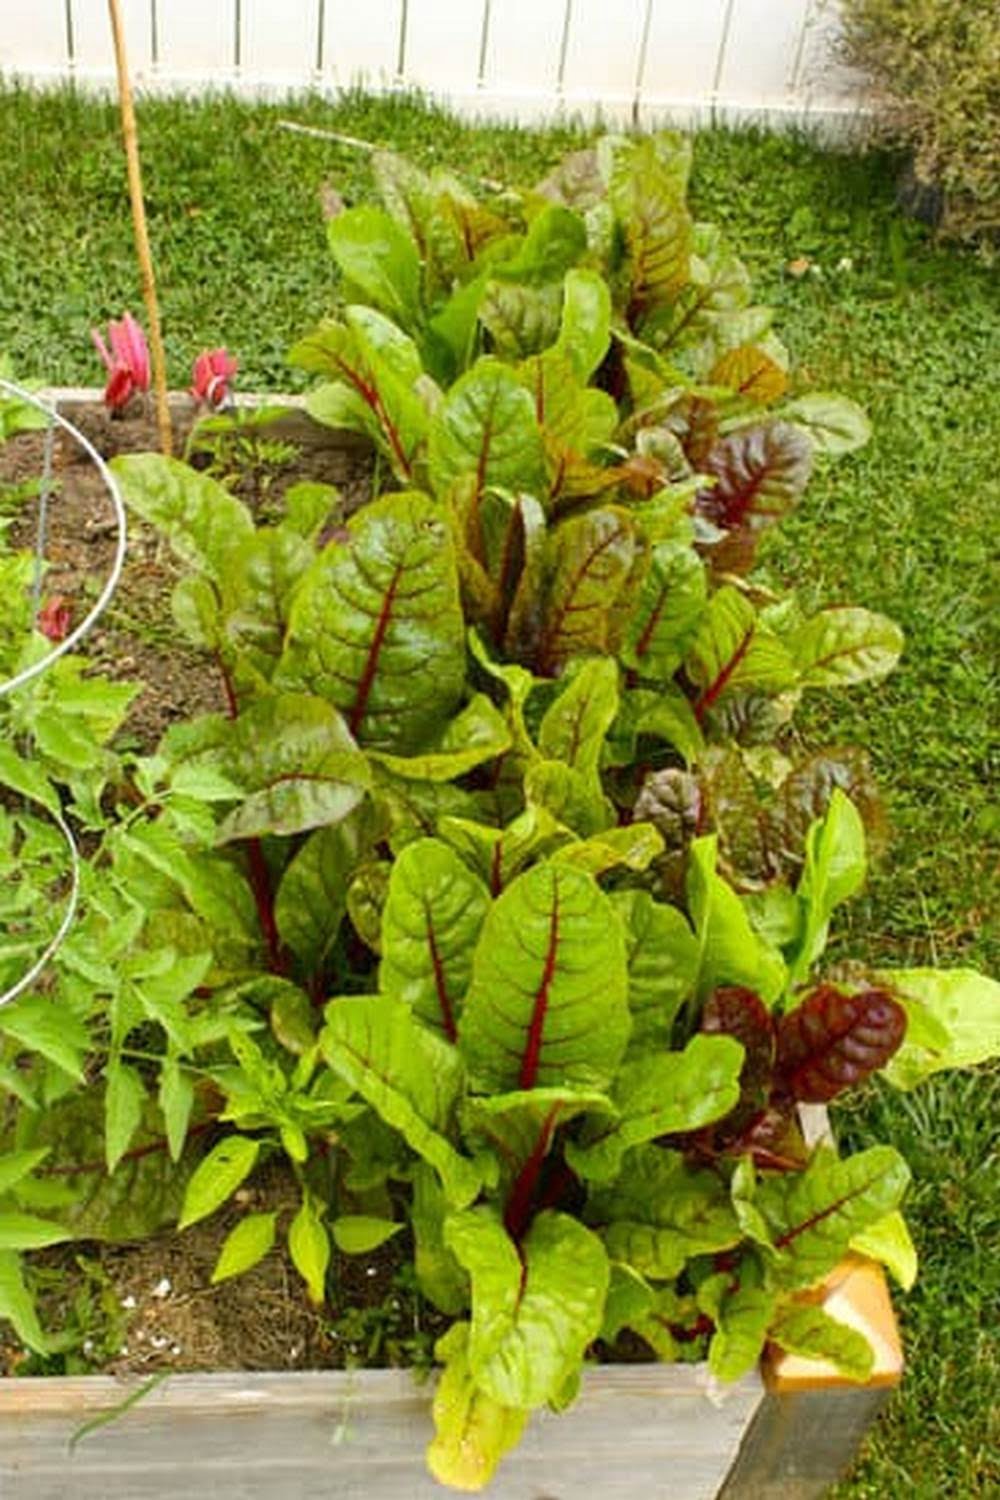 What Is The Best Soil To Buy For Vegetable Garden